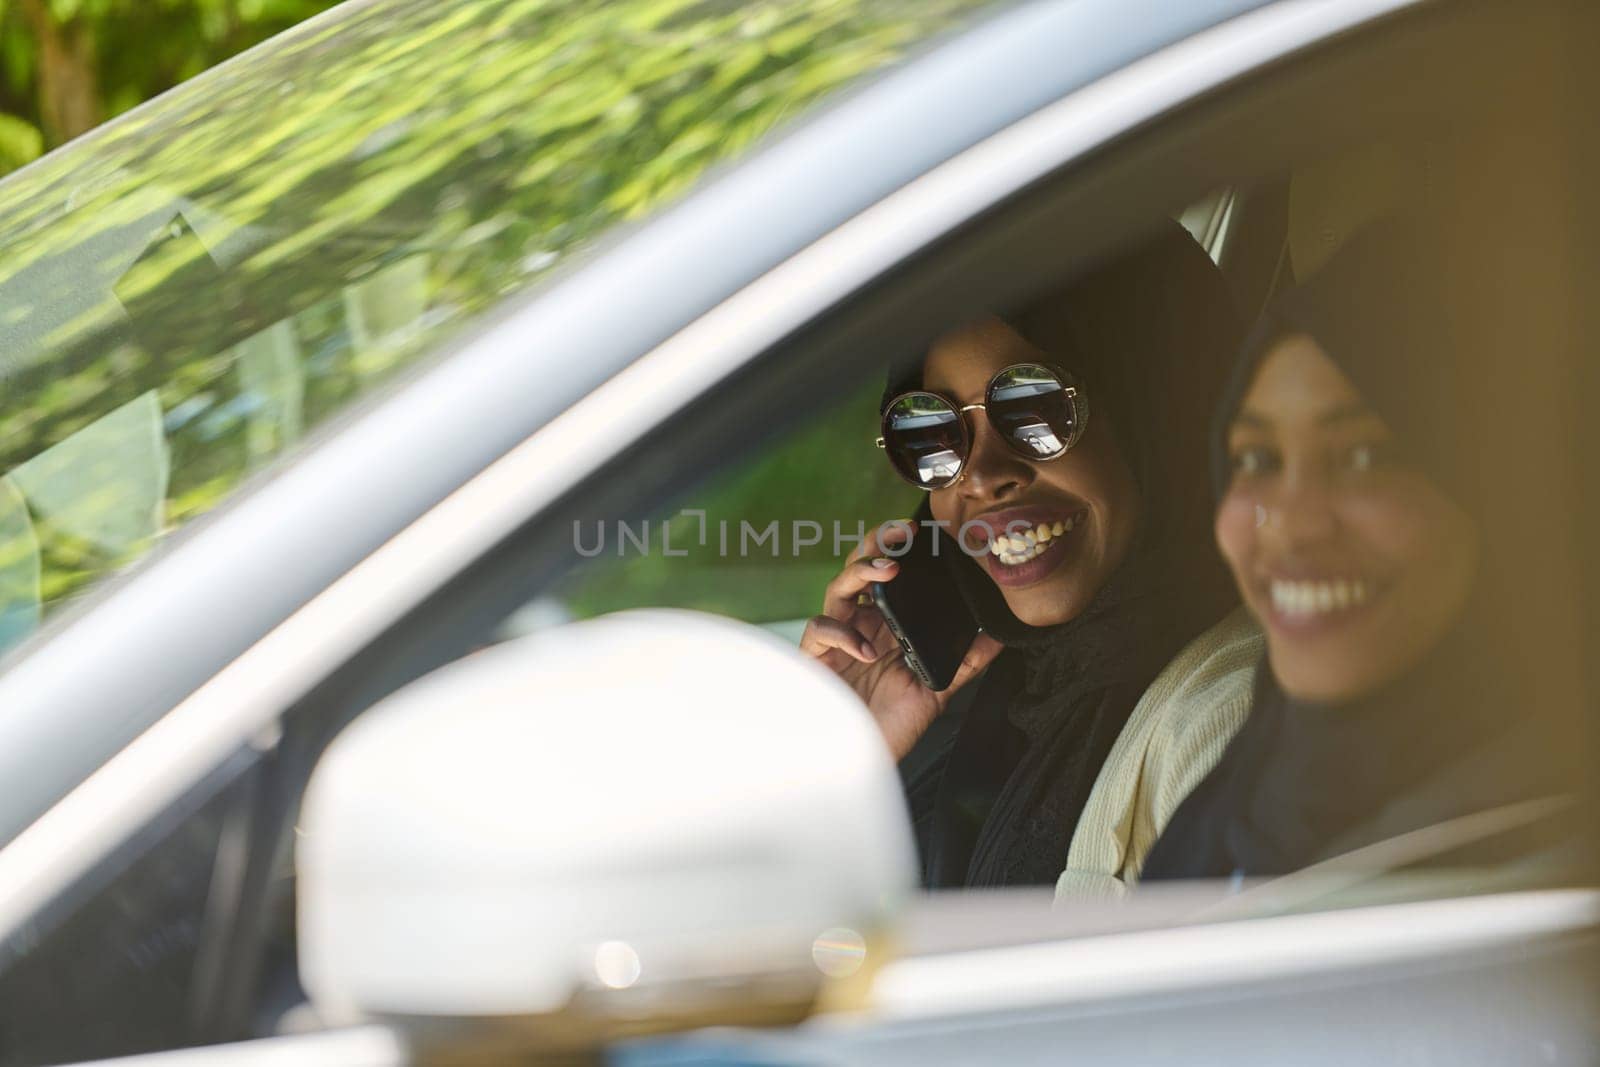 Two Muslim women wearing hijab converse on a smartphone while traveling together in a car through the.